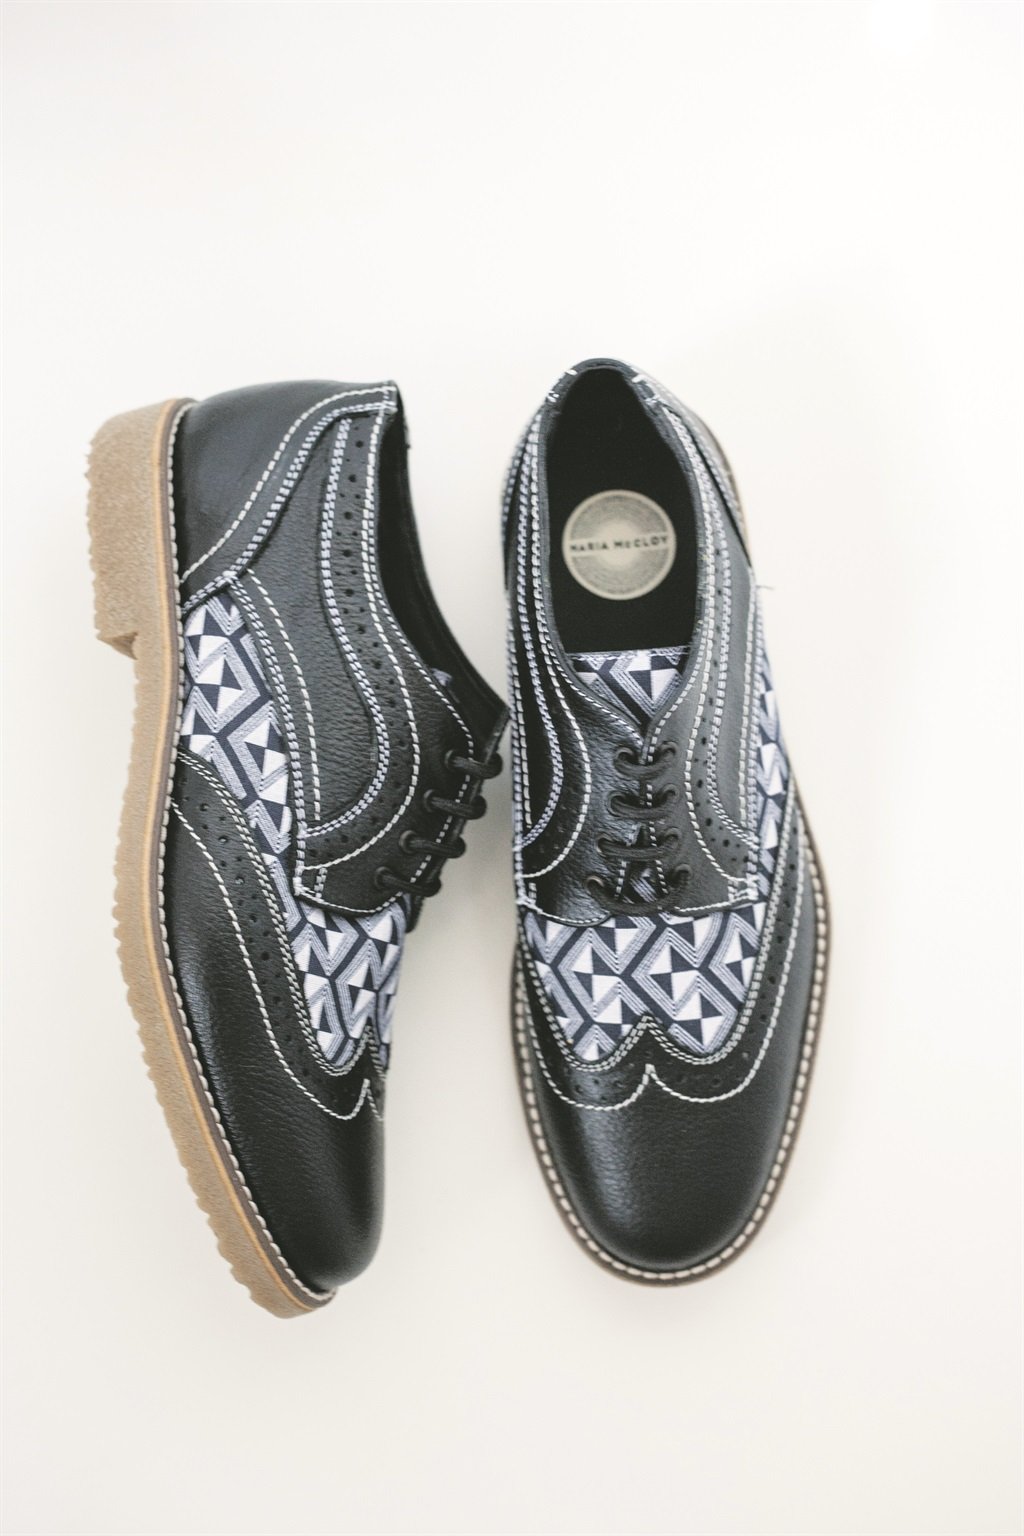 Designer Maria Mccloy's brogues and high tops made it on to The Most Beautiful Objects in South Africa list for the Design Indaba conference. 